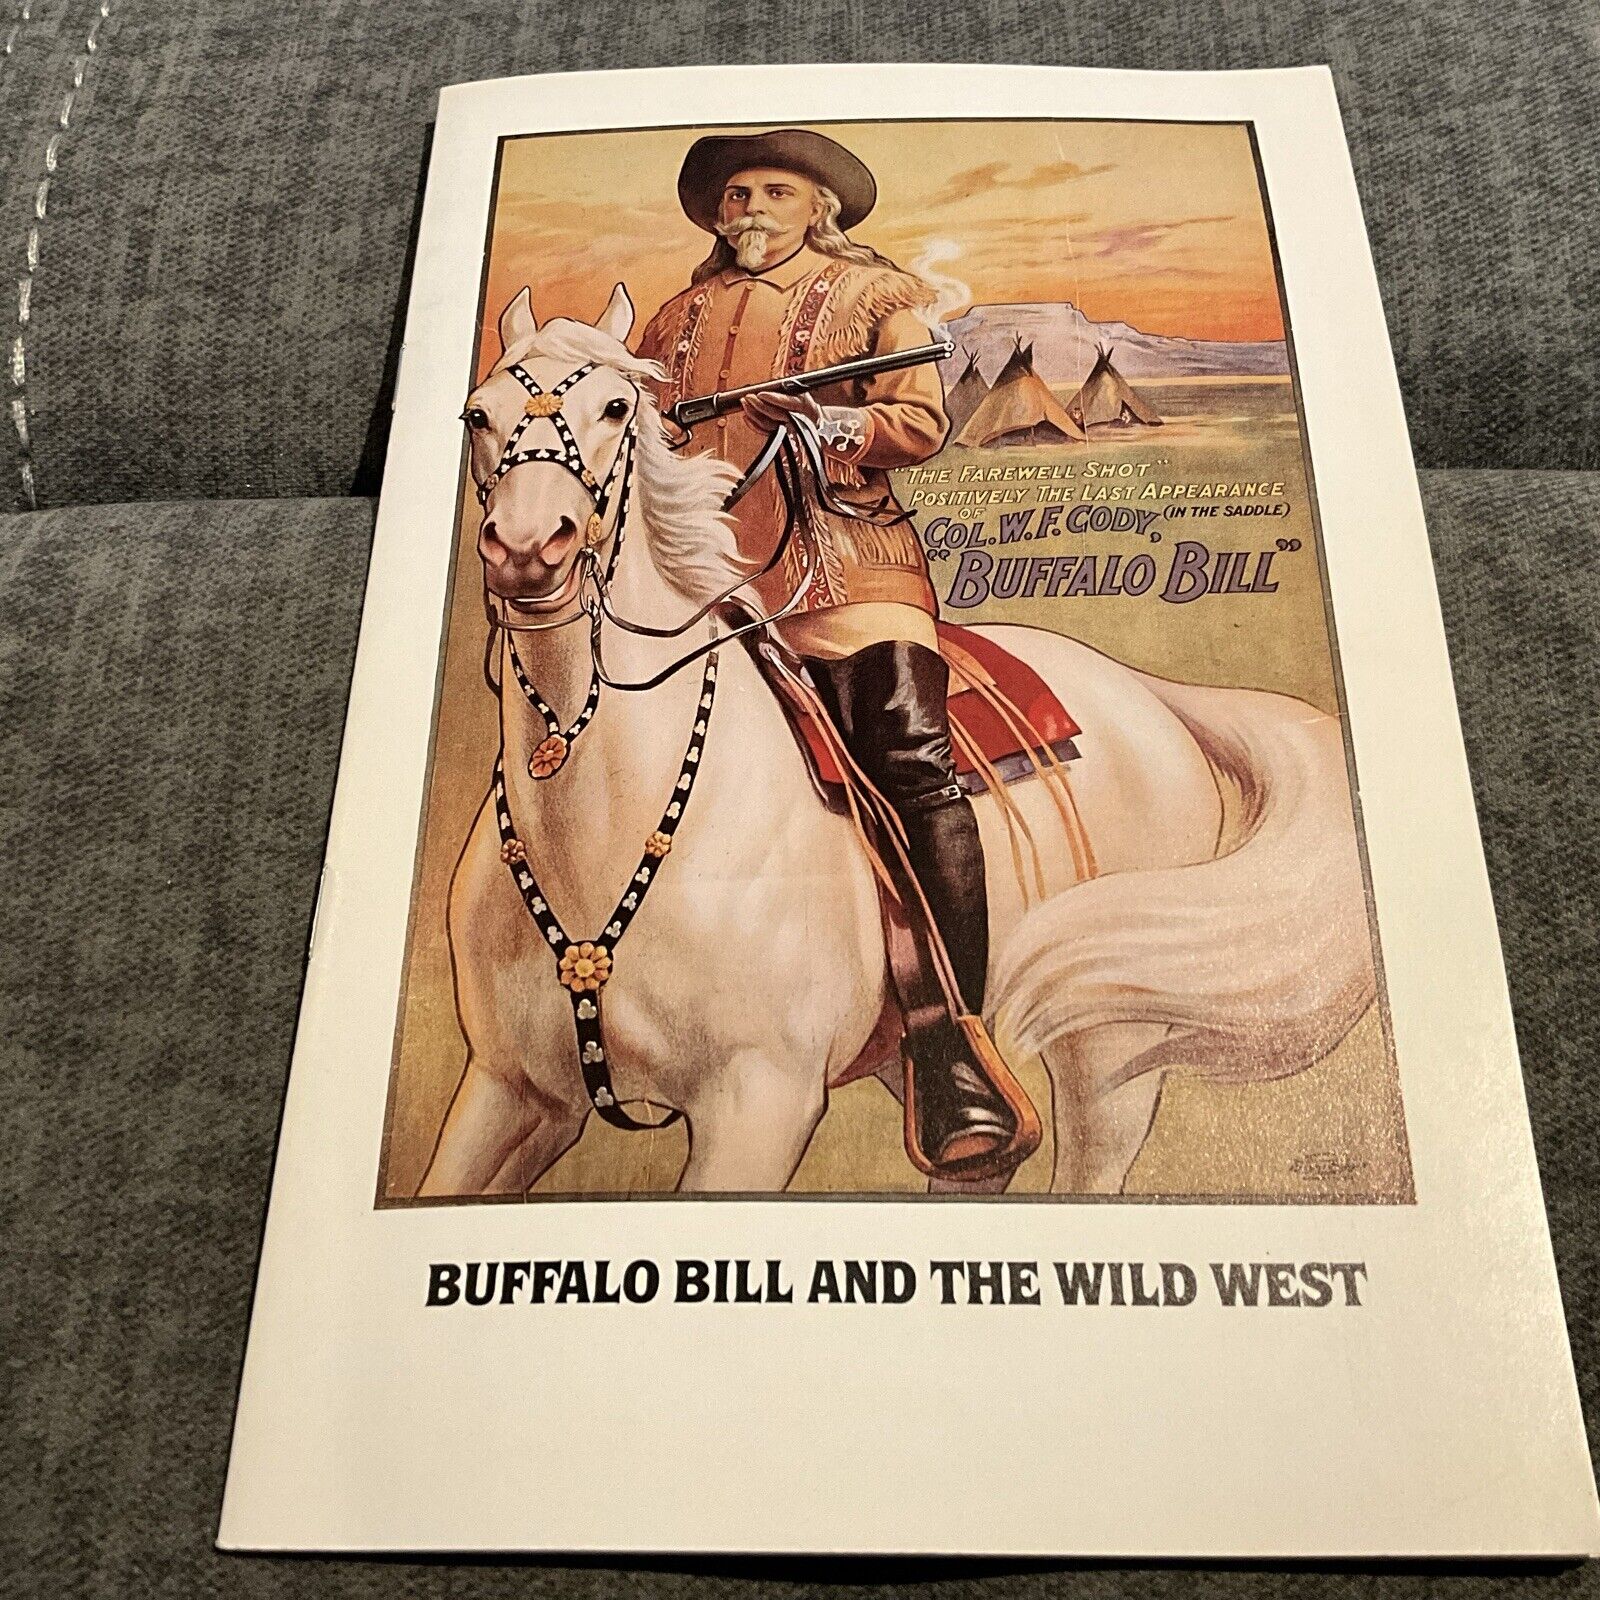 1981-‘82 Buffalo Bill And The Wild West Exhibition Museum Tour Program 1982